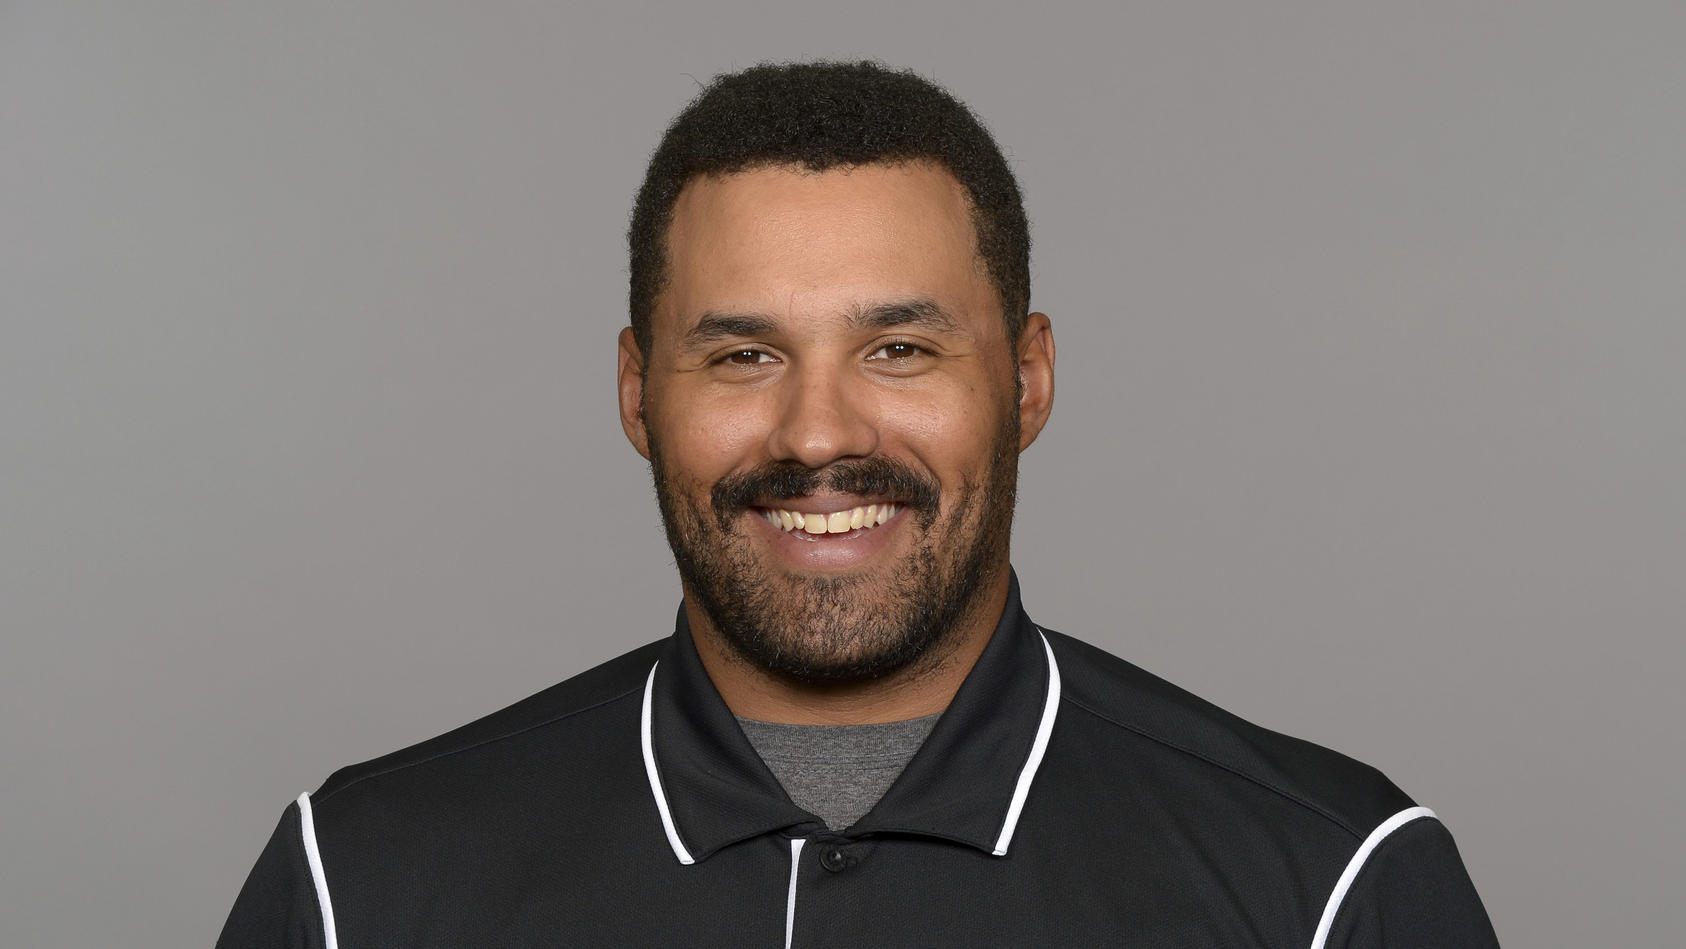 FILE - Kevin Maxen of the Jacksonville Jaguars NFL football team poses for a photo in June 2021. Maxen, an associate strength coach with the Jaguars, has become the first male coach in a major U.S.-based professional league to come out as gay. Maxen 